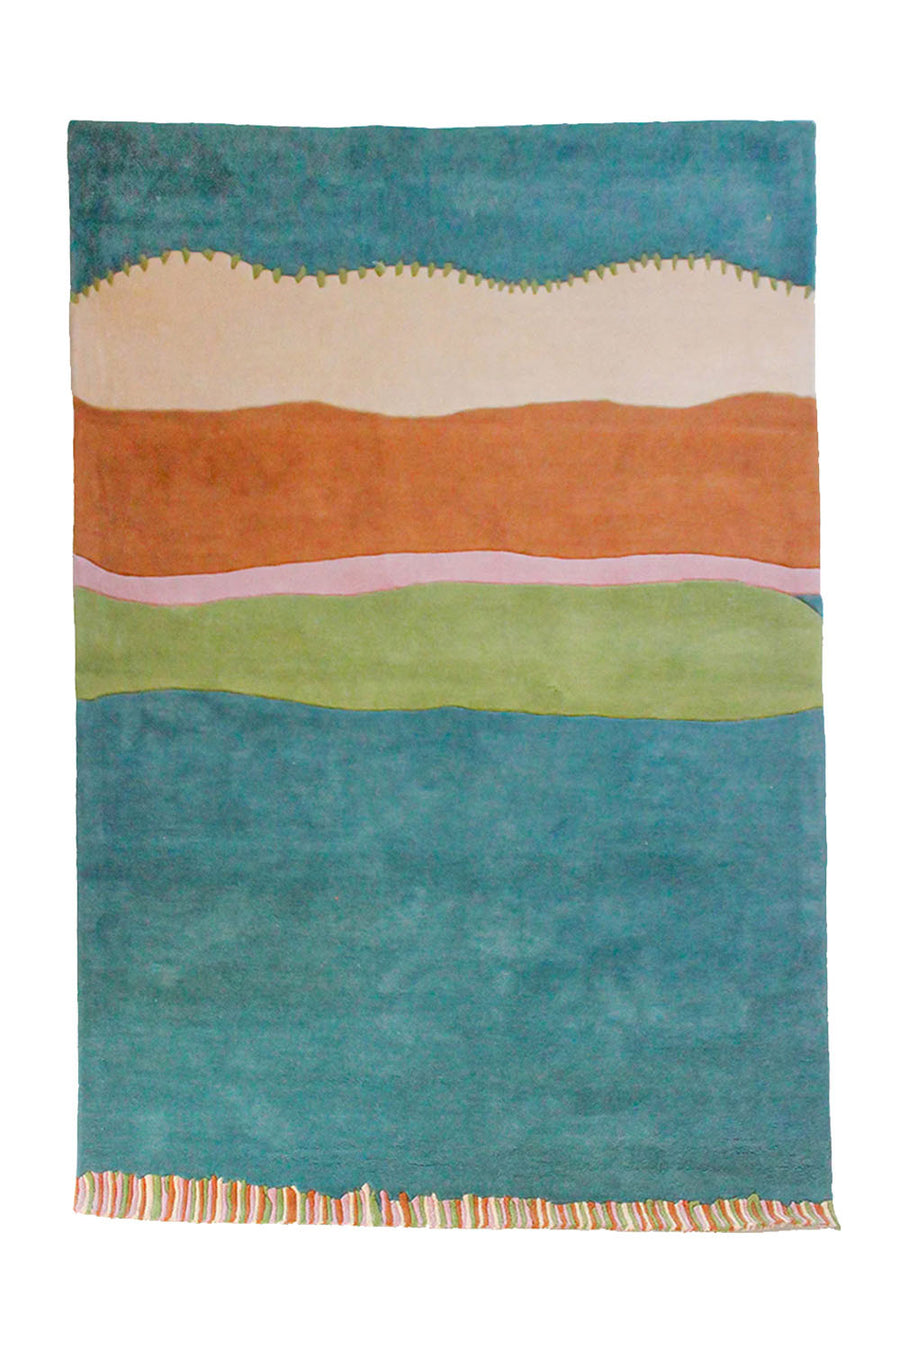 Stitched and Striped: Teal and Orange Wool Hand Tufted Rug